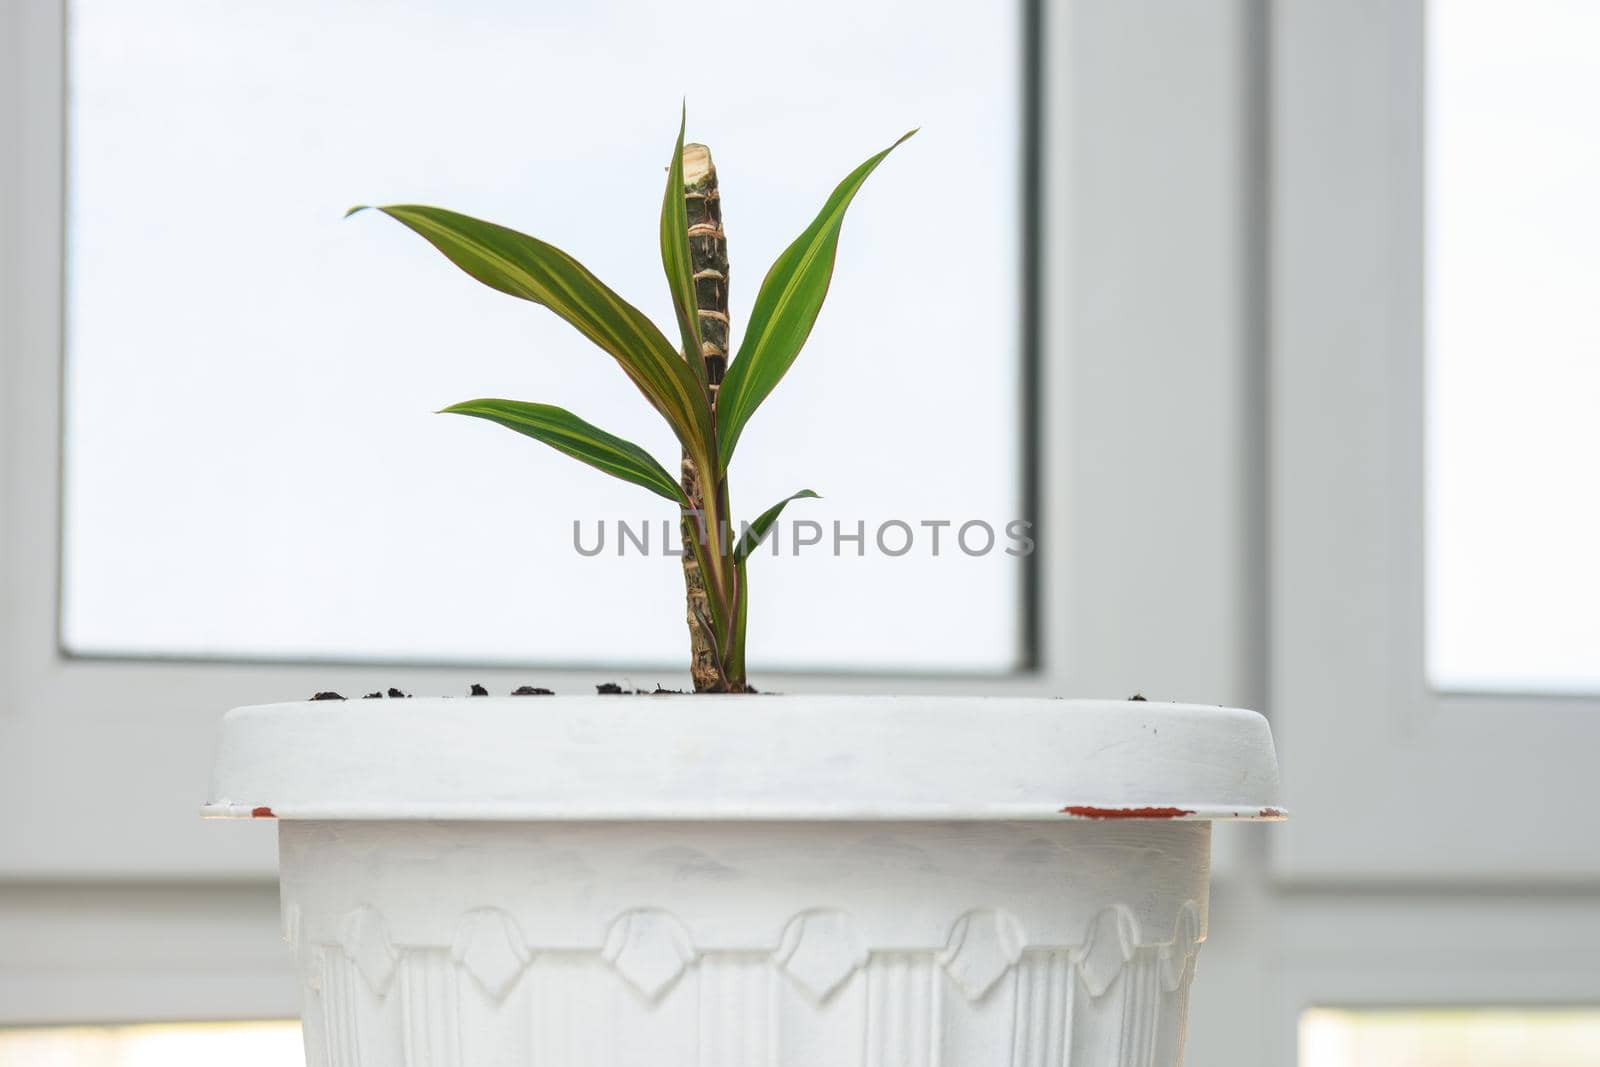 Seedling of a plant Cordilina close-up in a pot on a background of a window by Madhourse